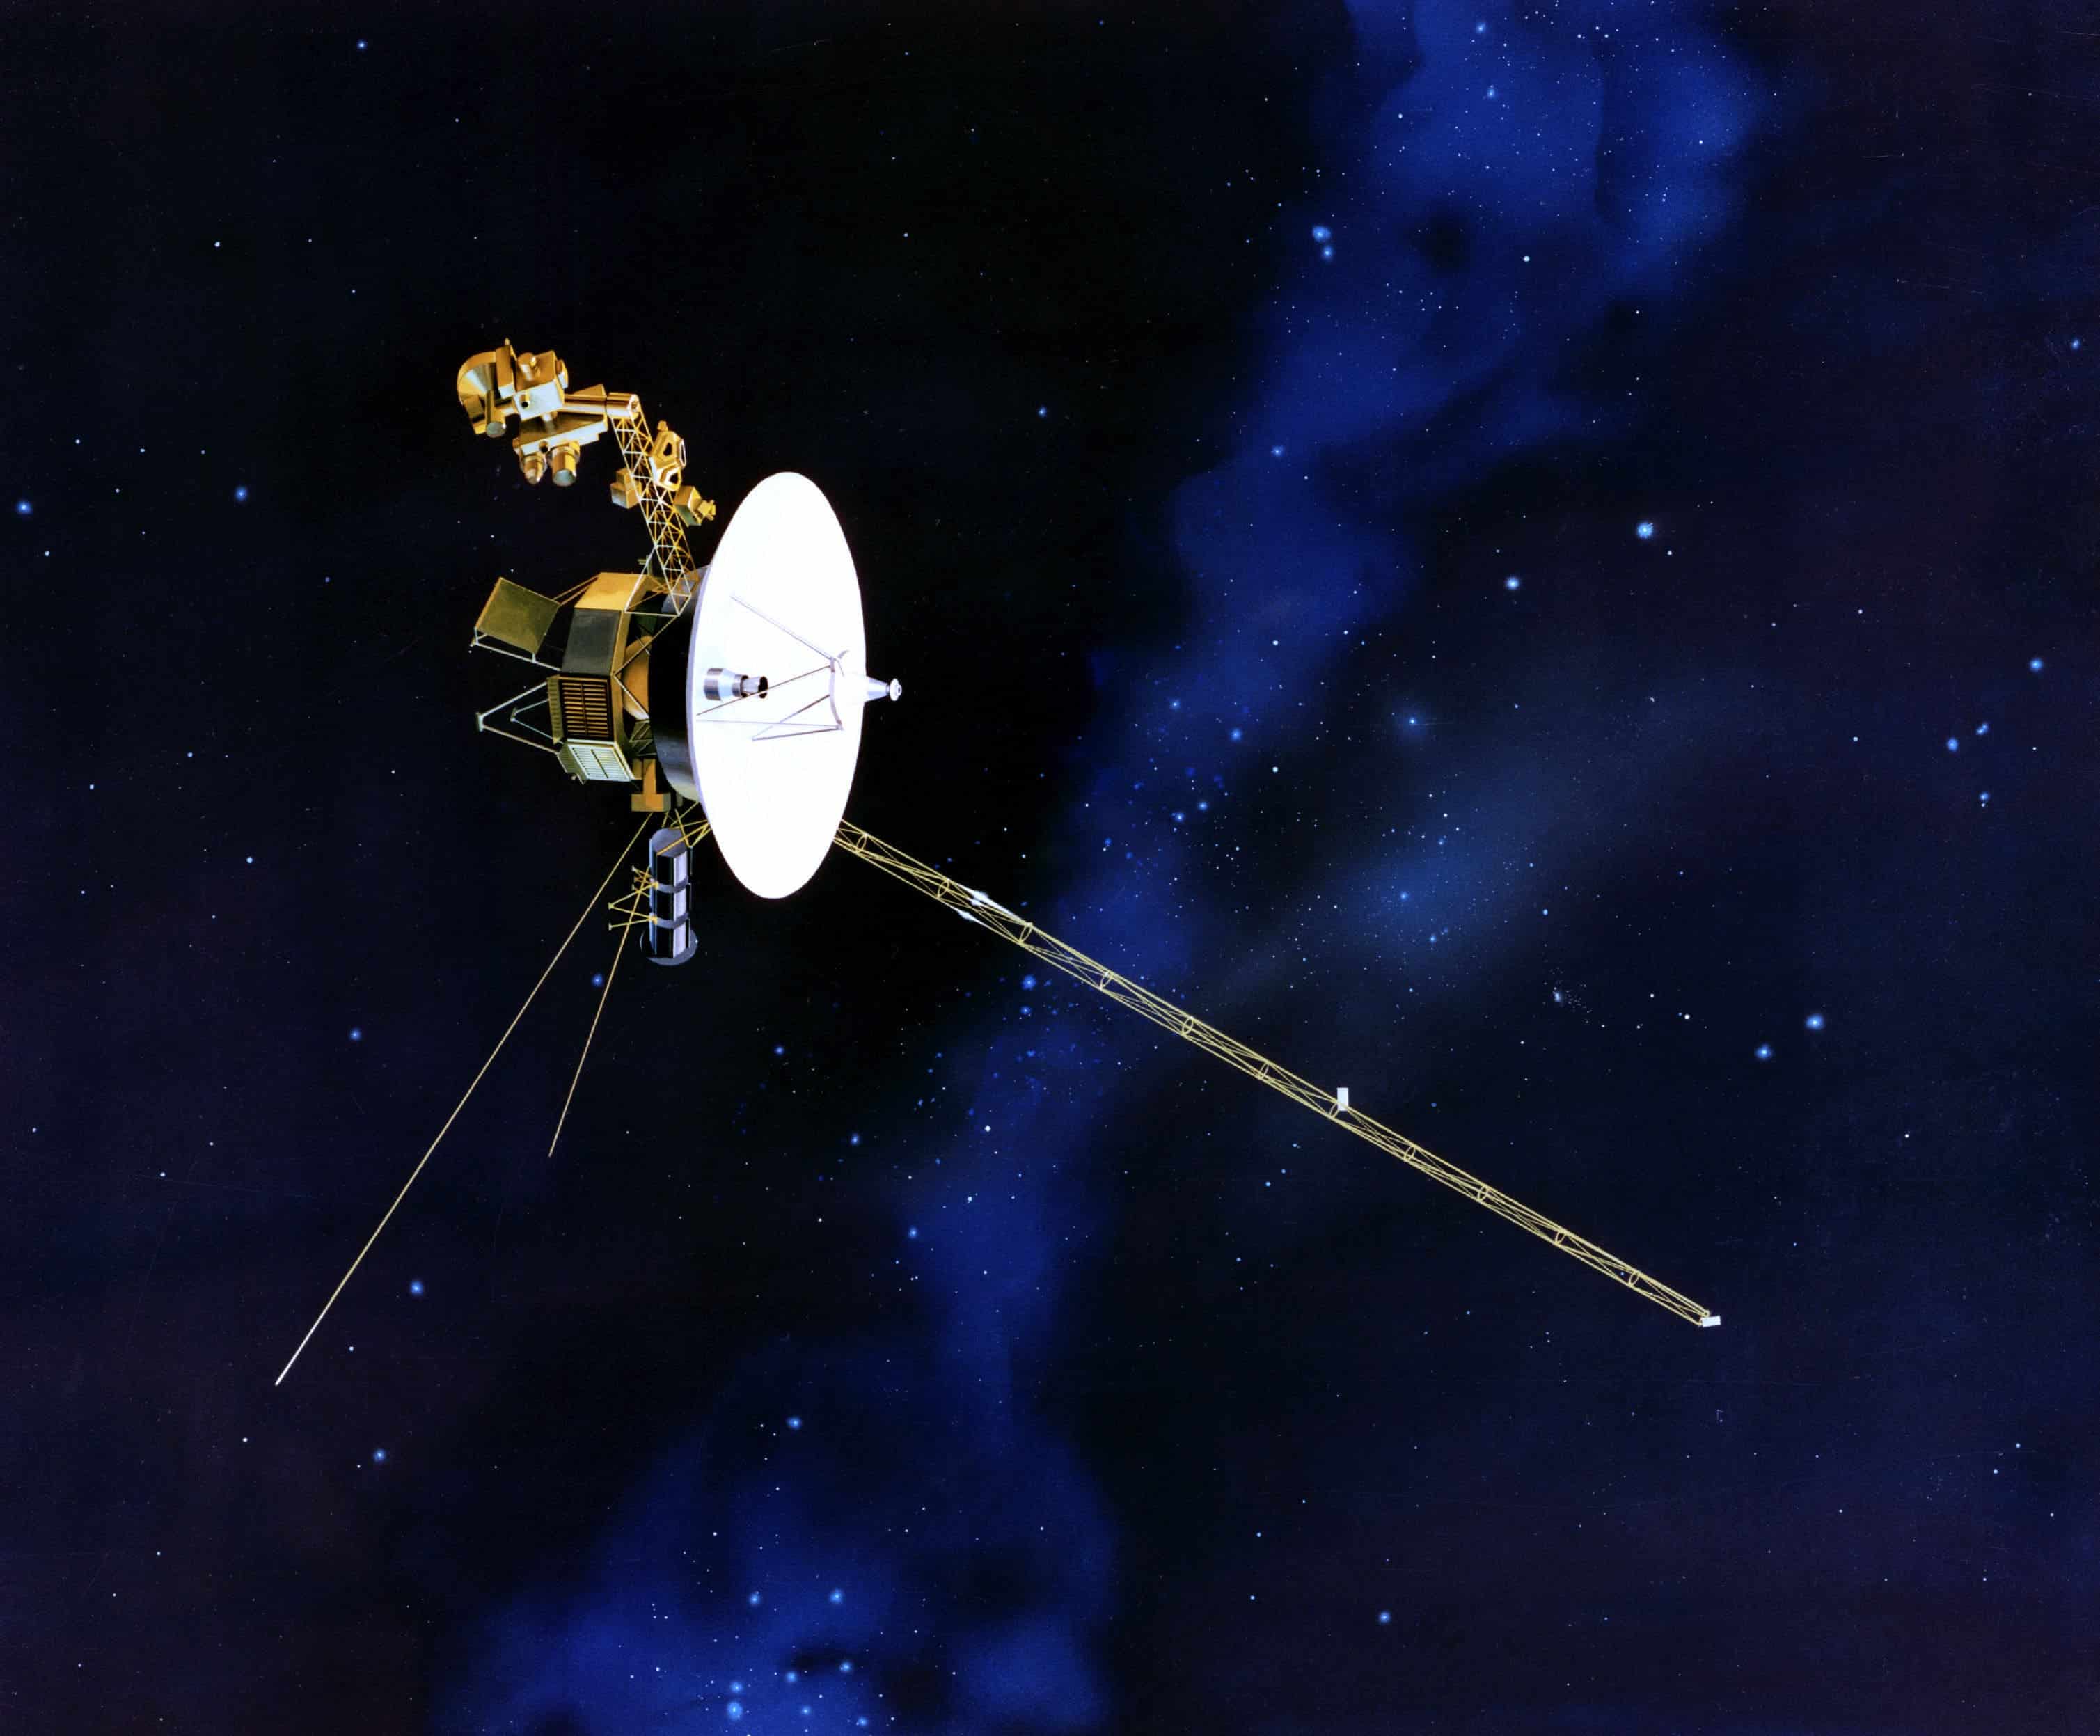 when was the voyager spacecraft launched